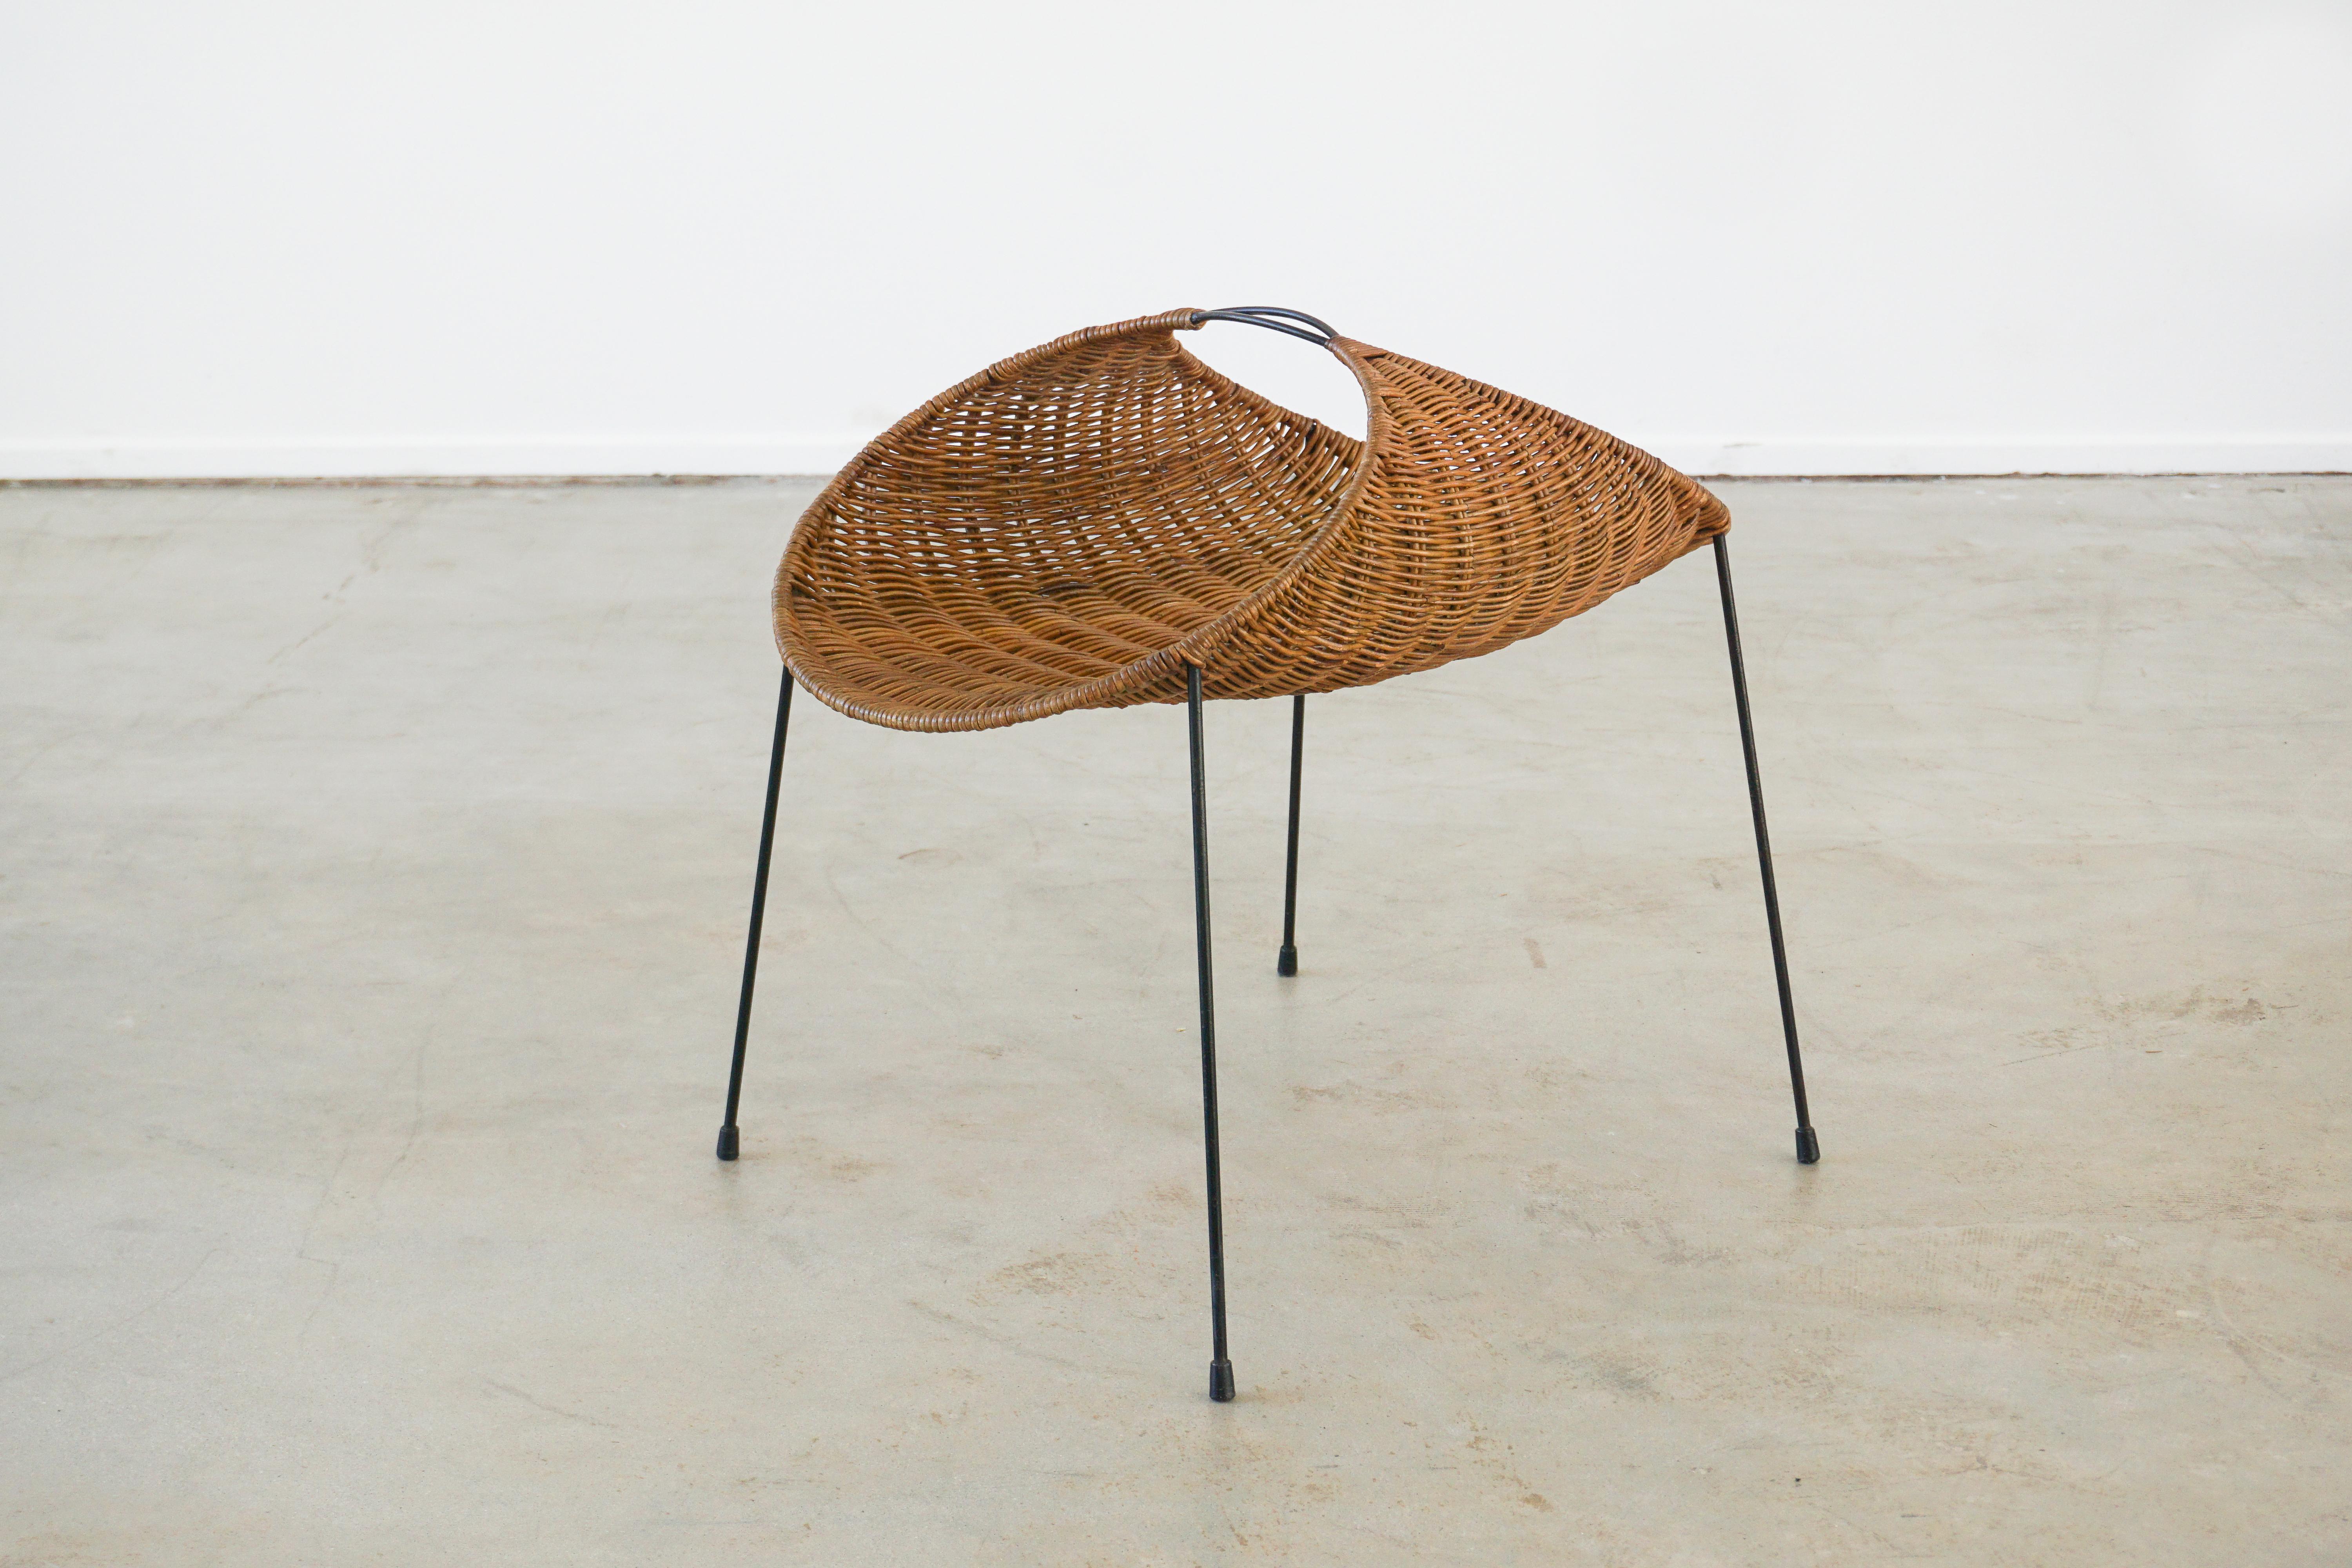 Wicker and iron magazine basket designed by Gian Franco Legler
Woven wicker with great shape sits on iron base.